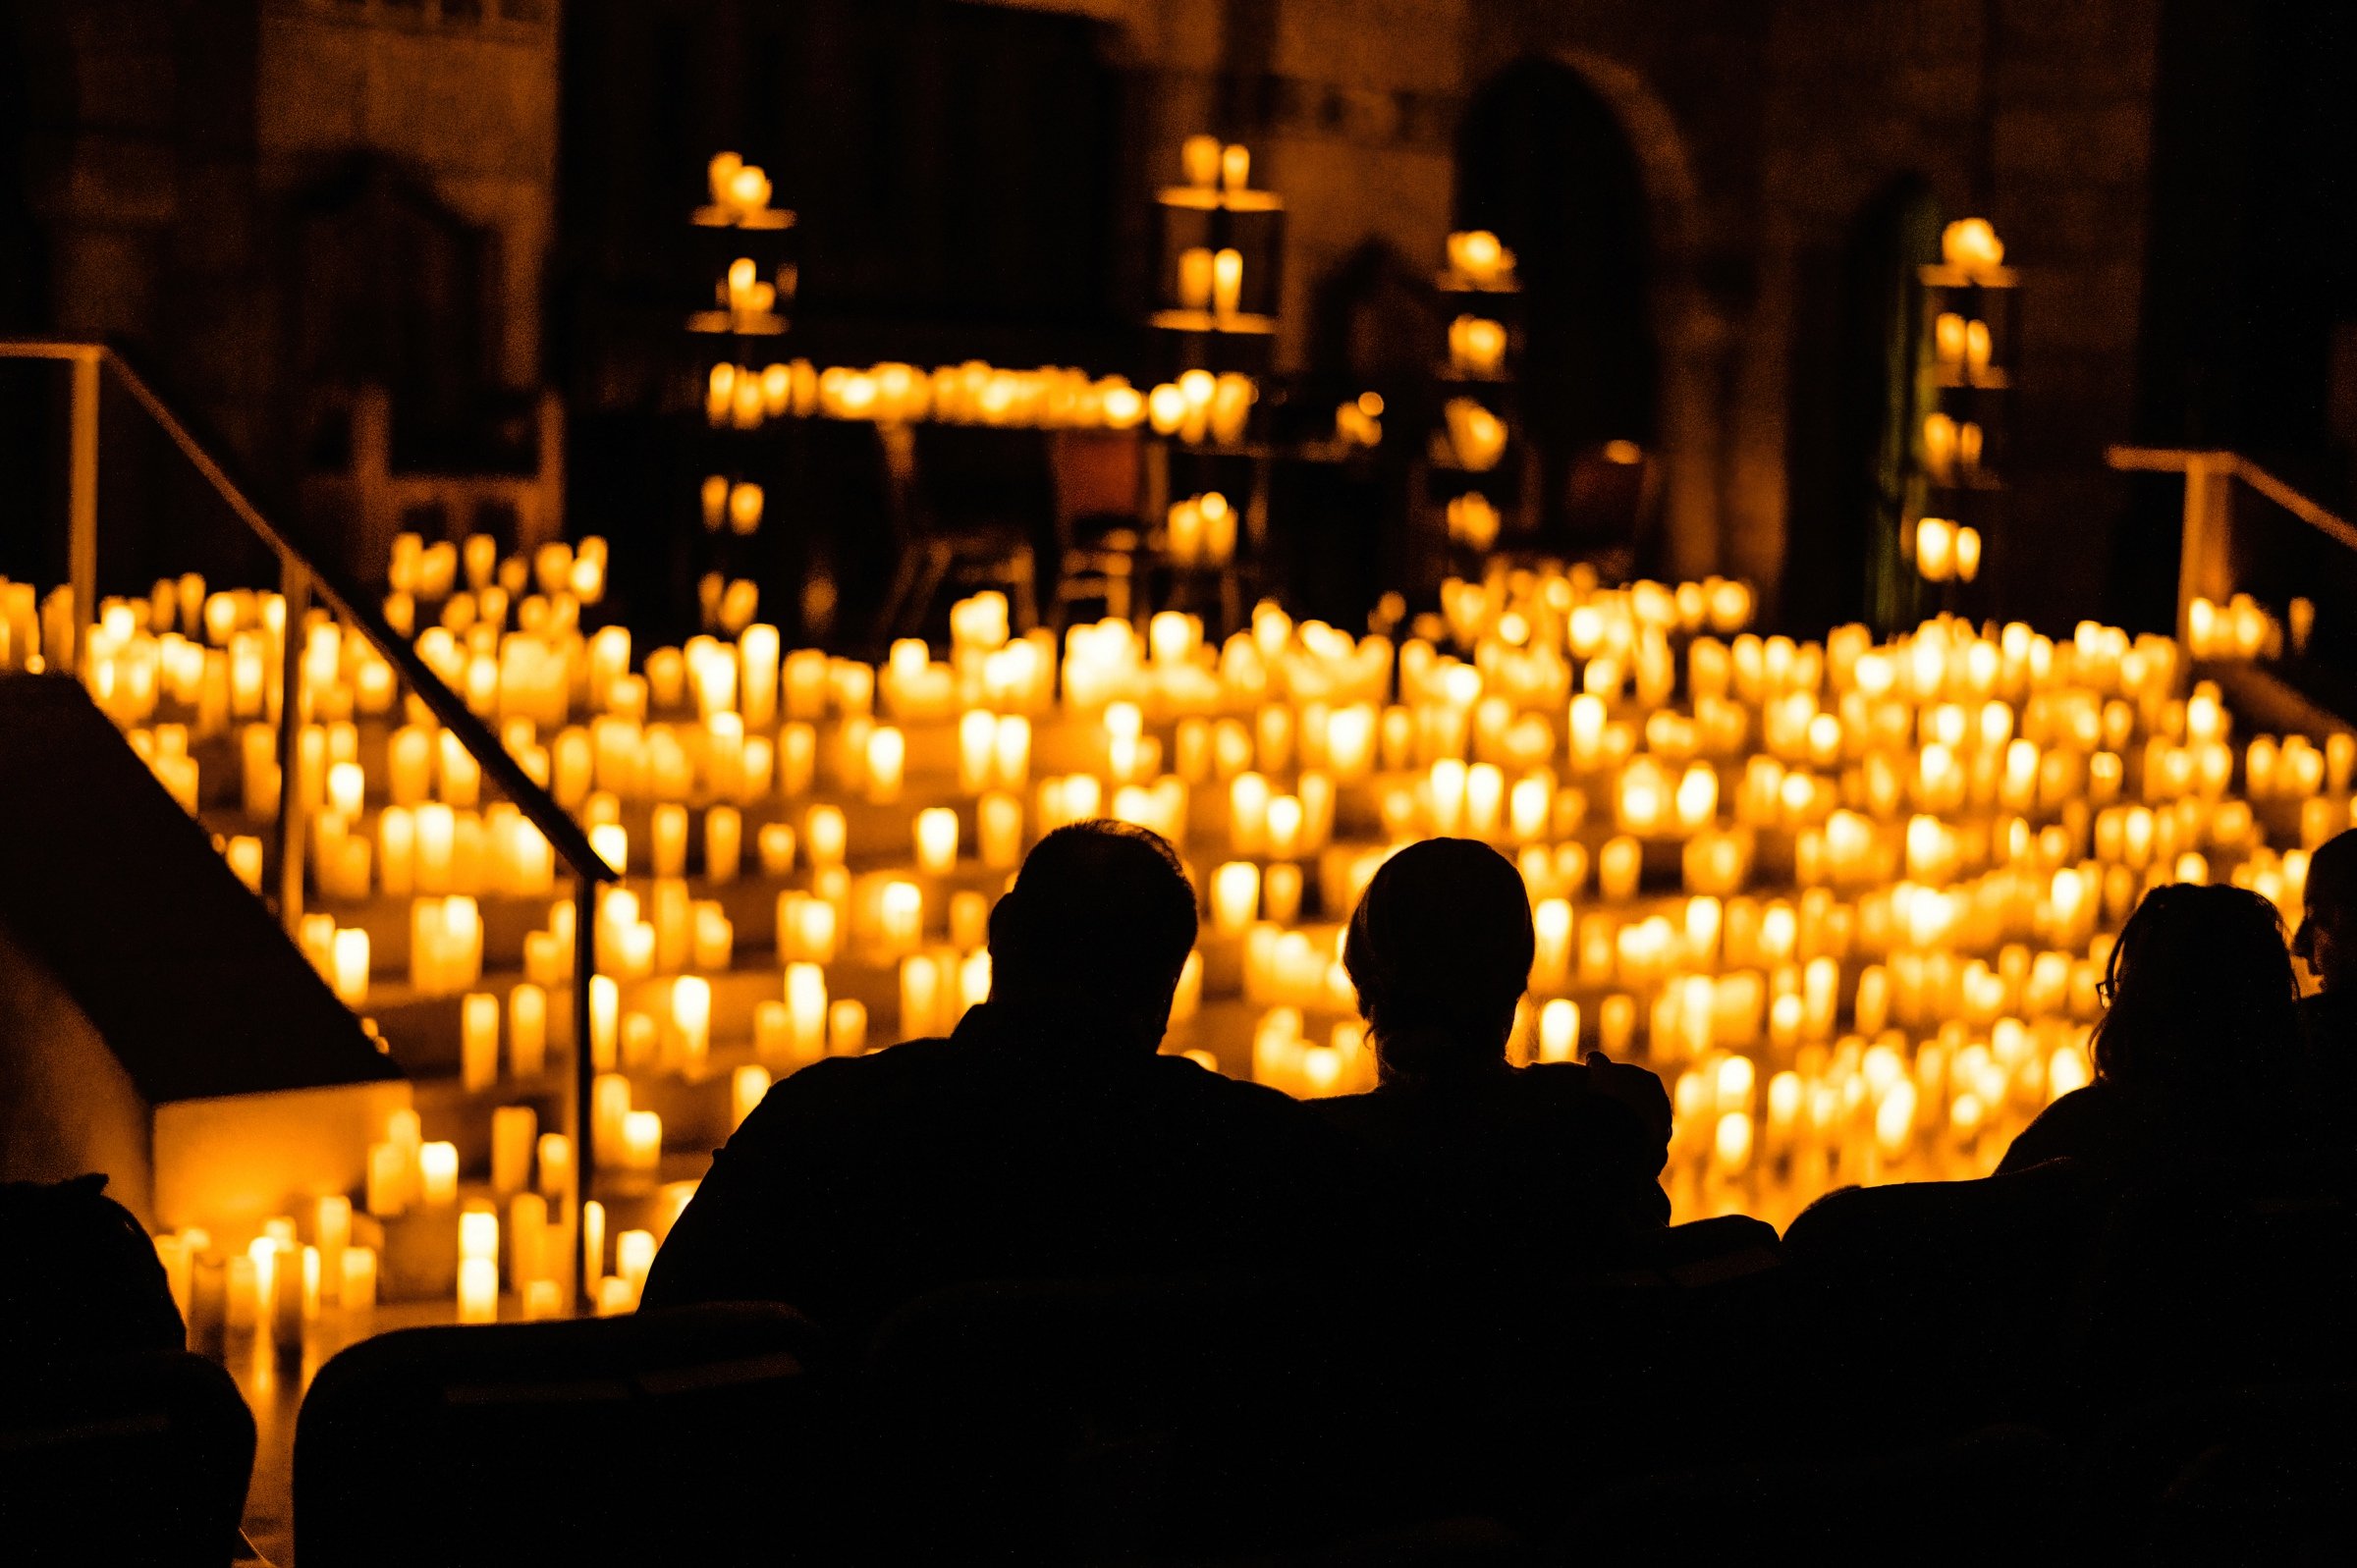 Grand Rapids Fountain Street Church Candlelight Concert Performance - Photographed for Fever by Ryan Inman - 20.jpg